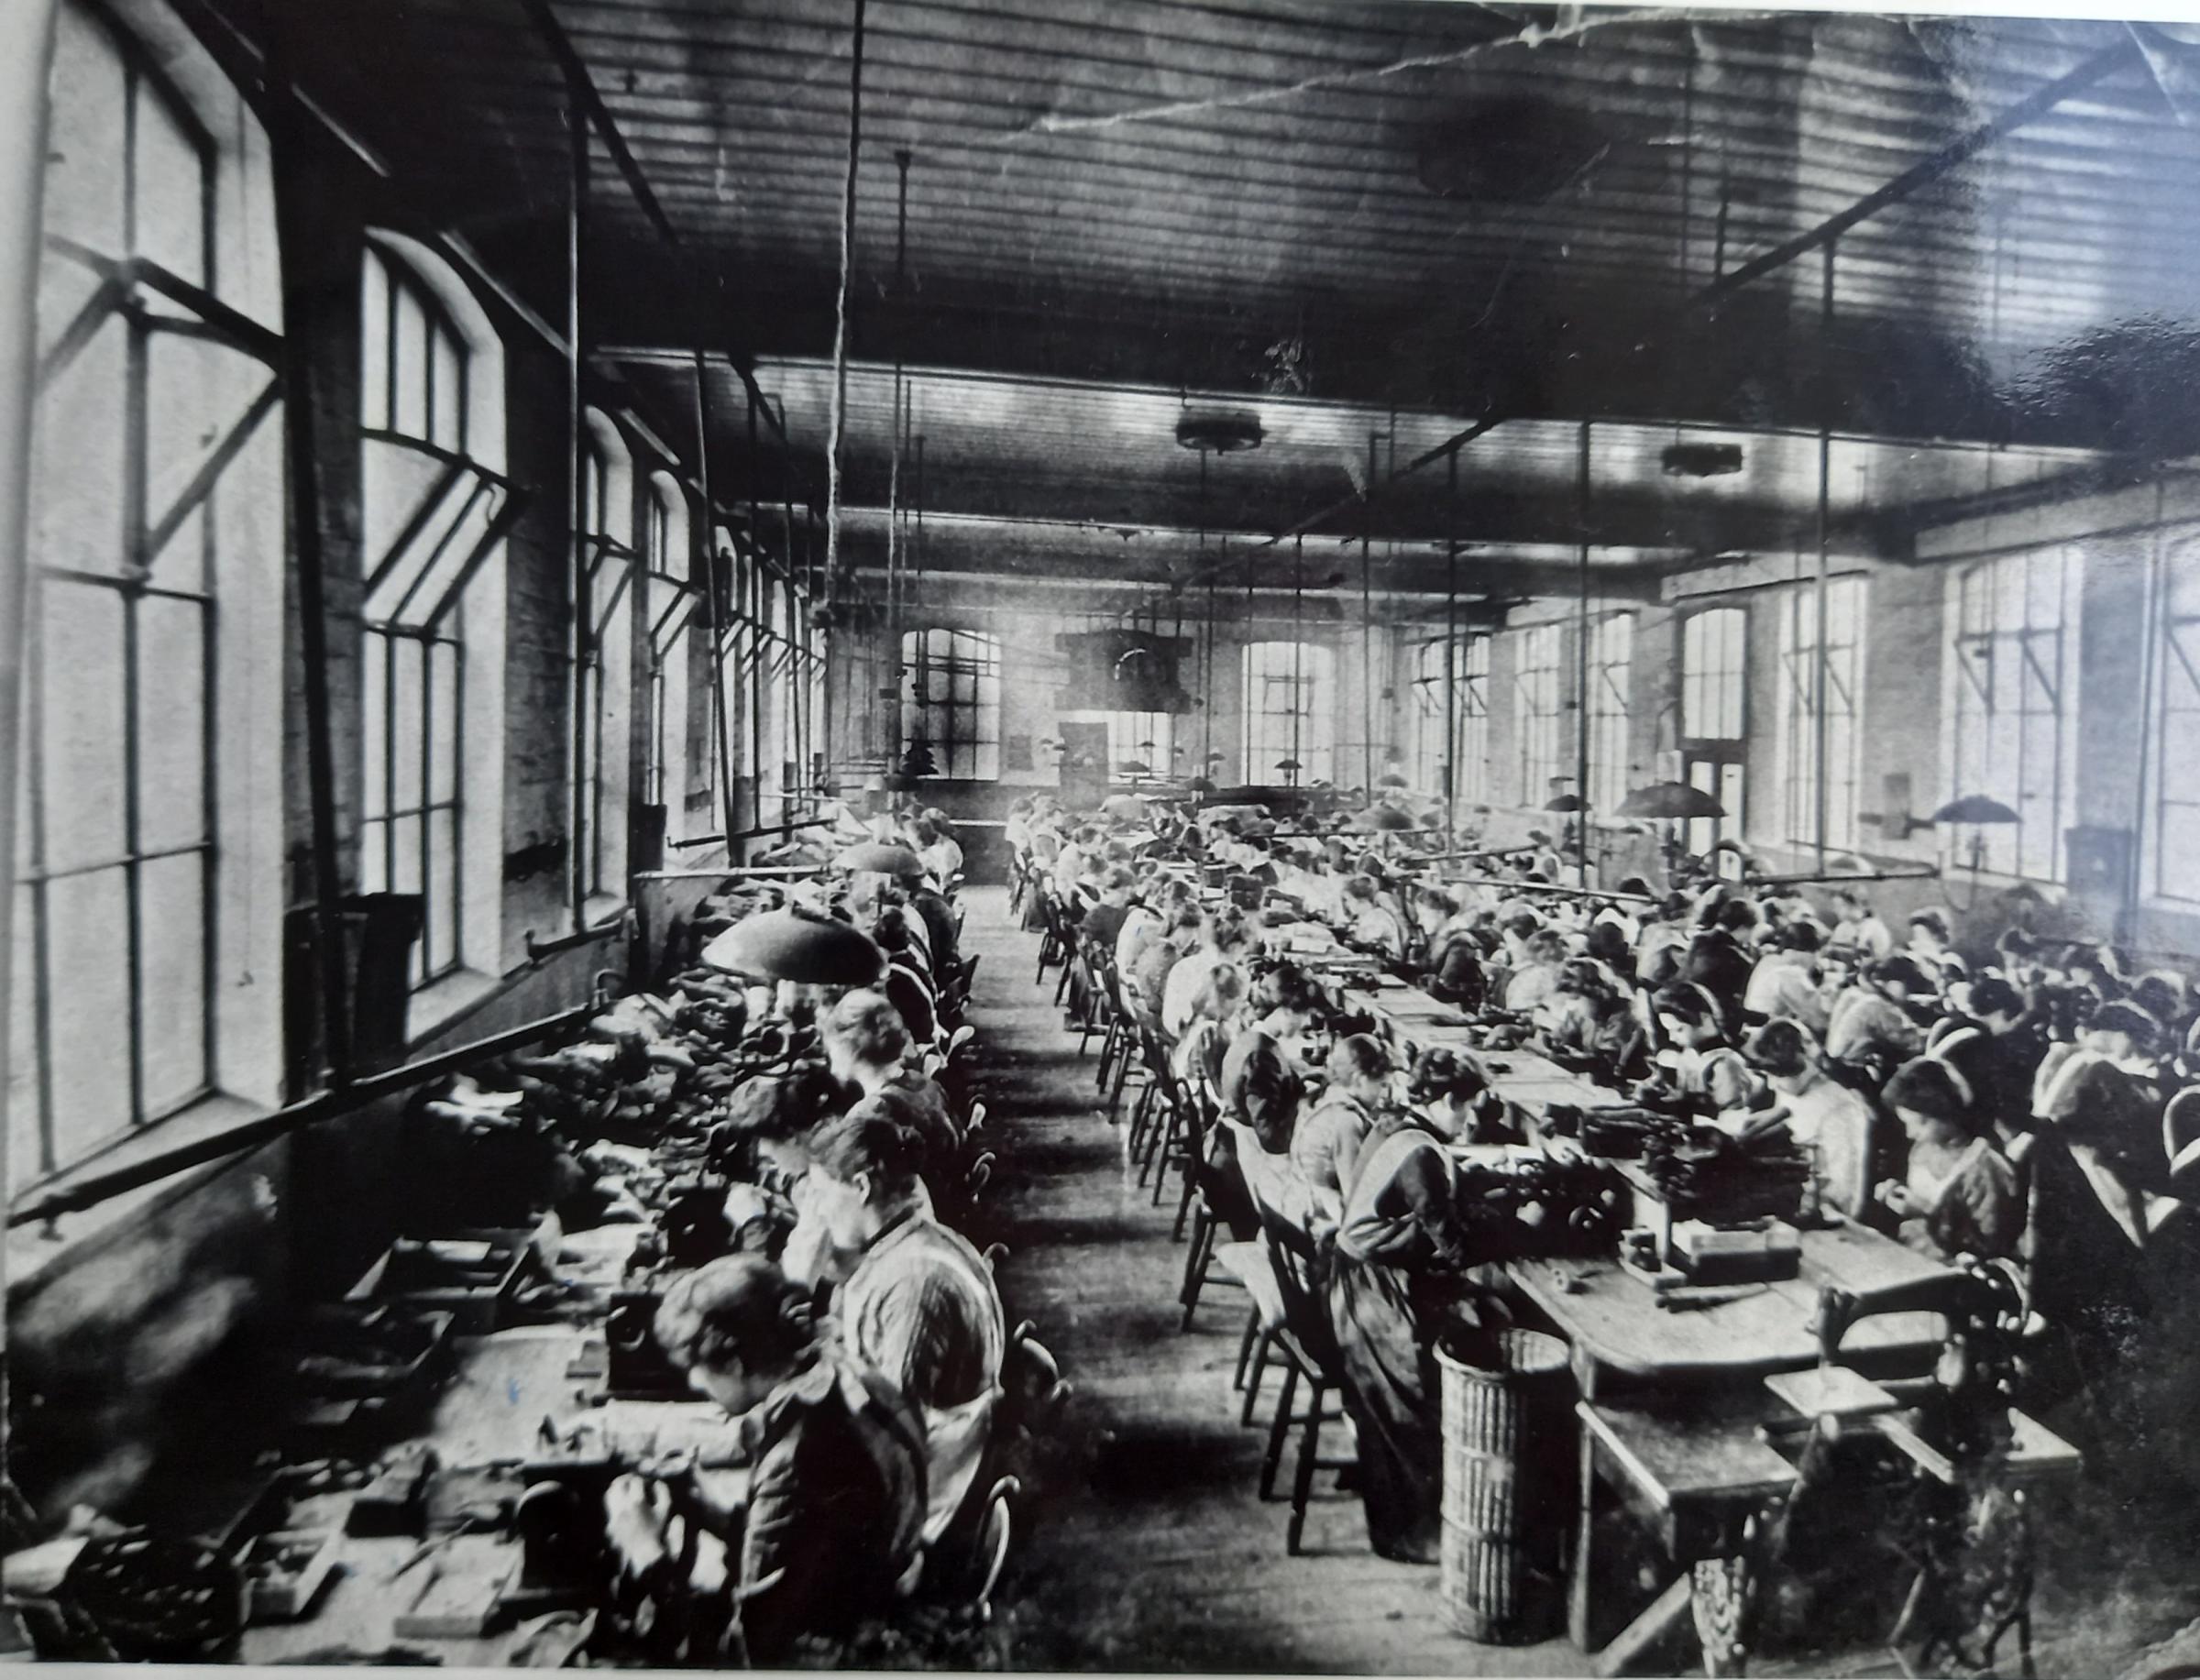 Victorian workers in the Fownes glove factory, now a hotel on City Walls Road